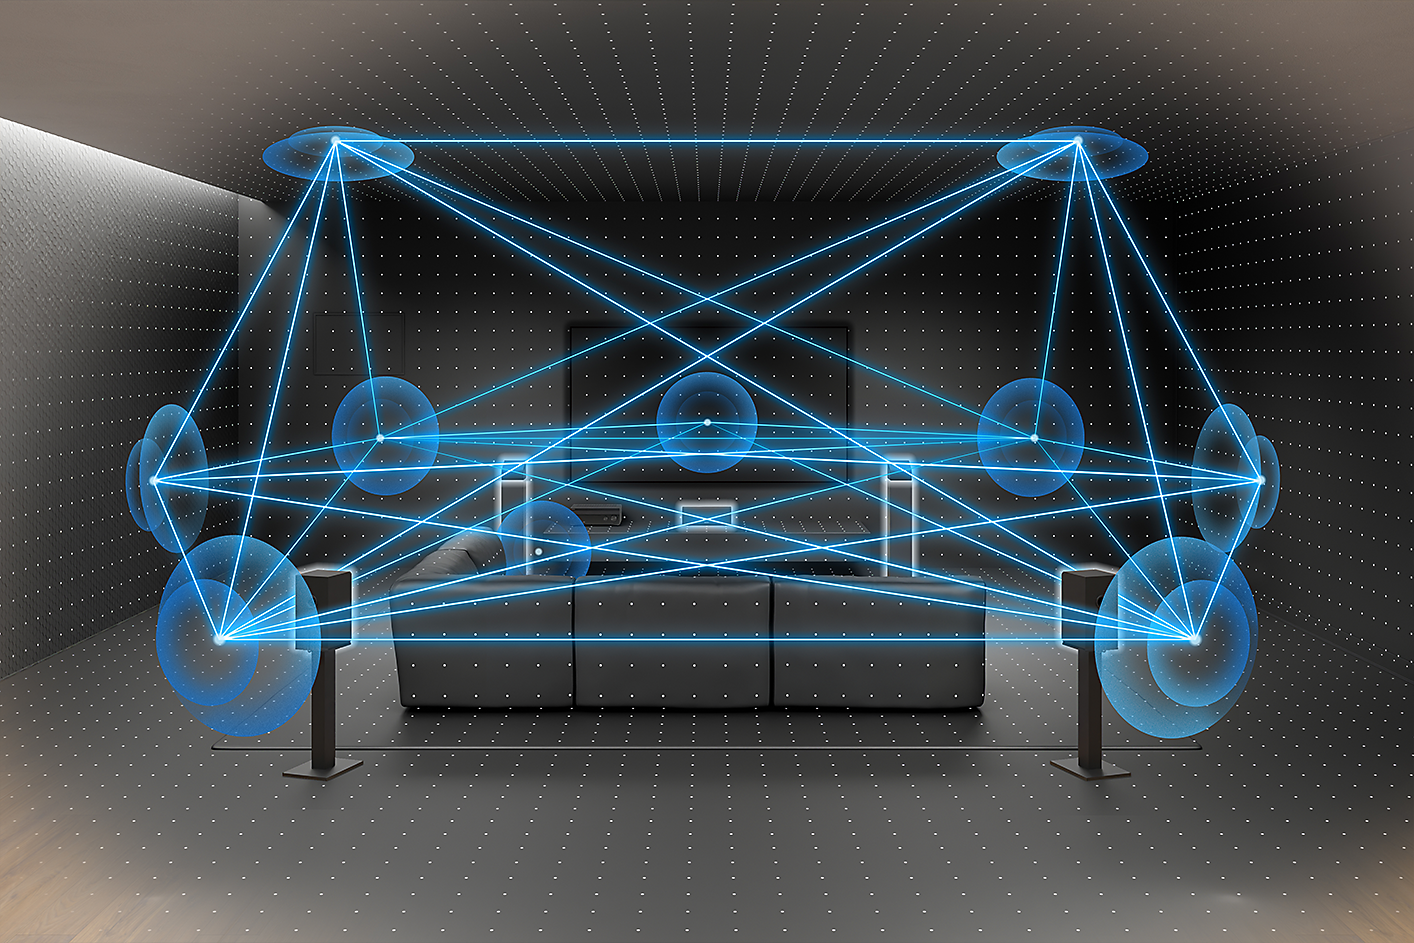 Image of a room with a sofa, TV and speakers. Multiple blue lines and circles demonstrate the movement of the sound